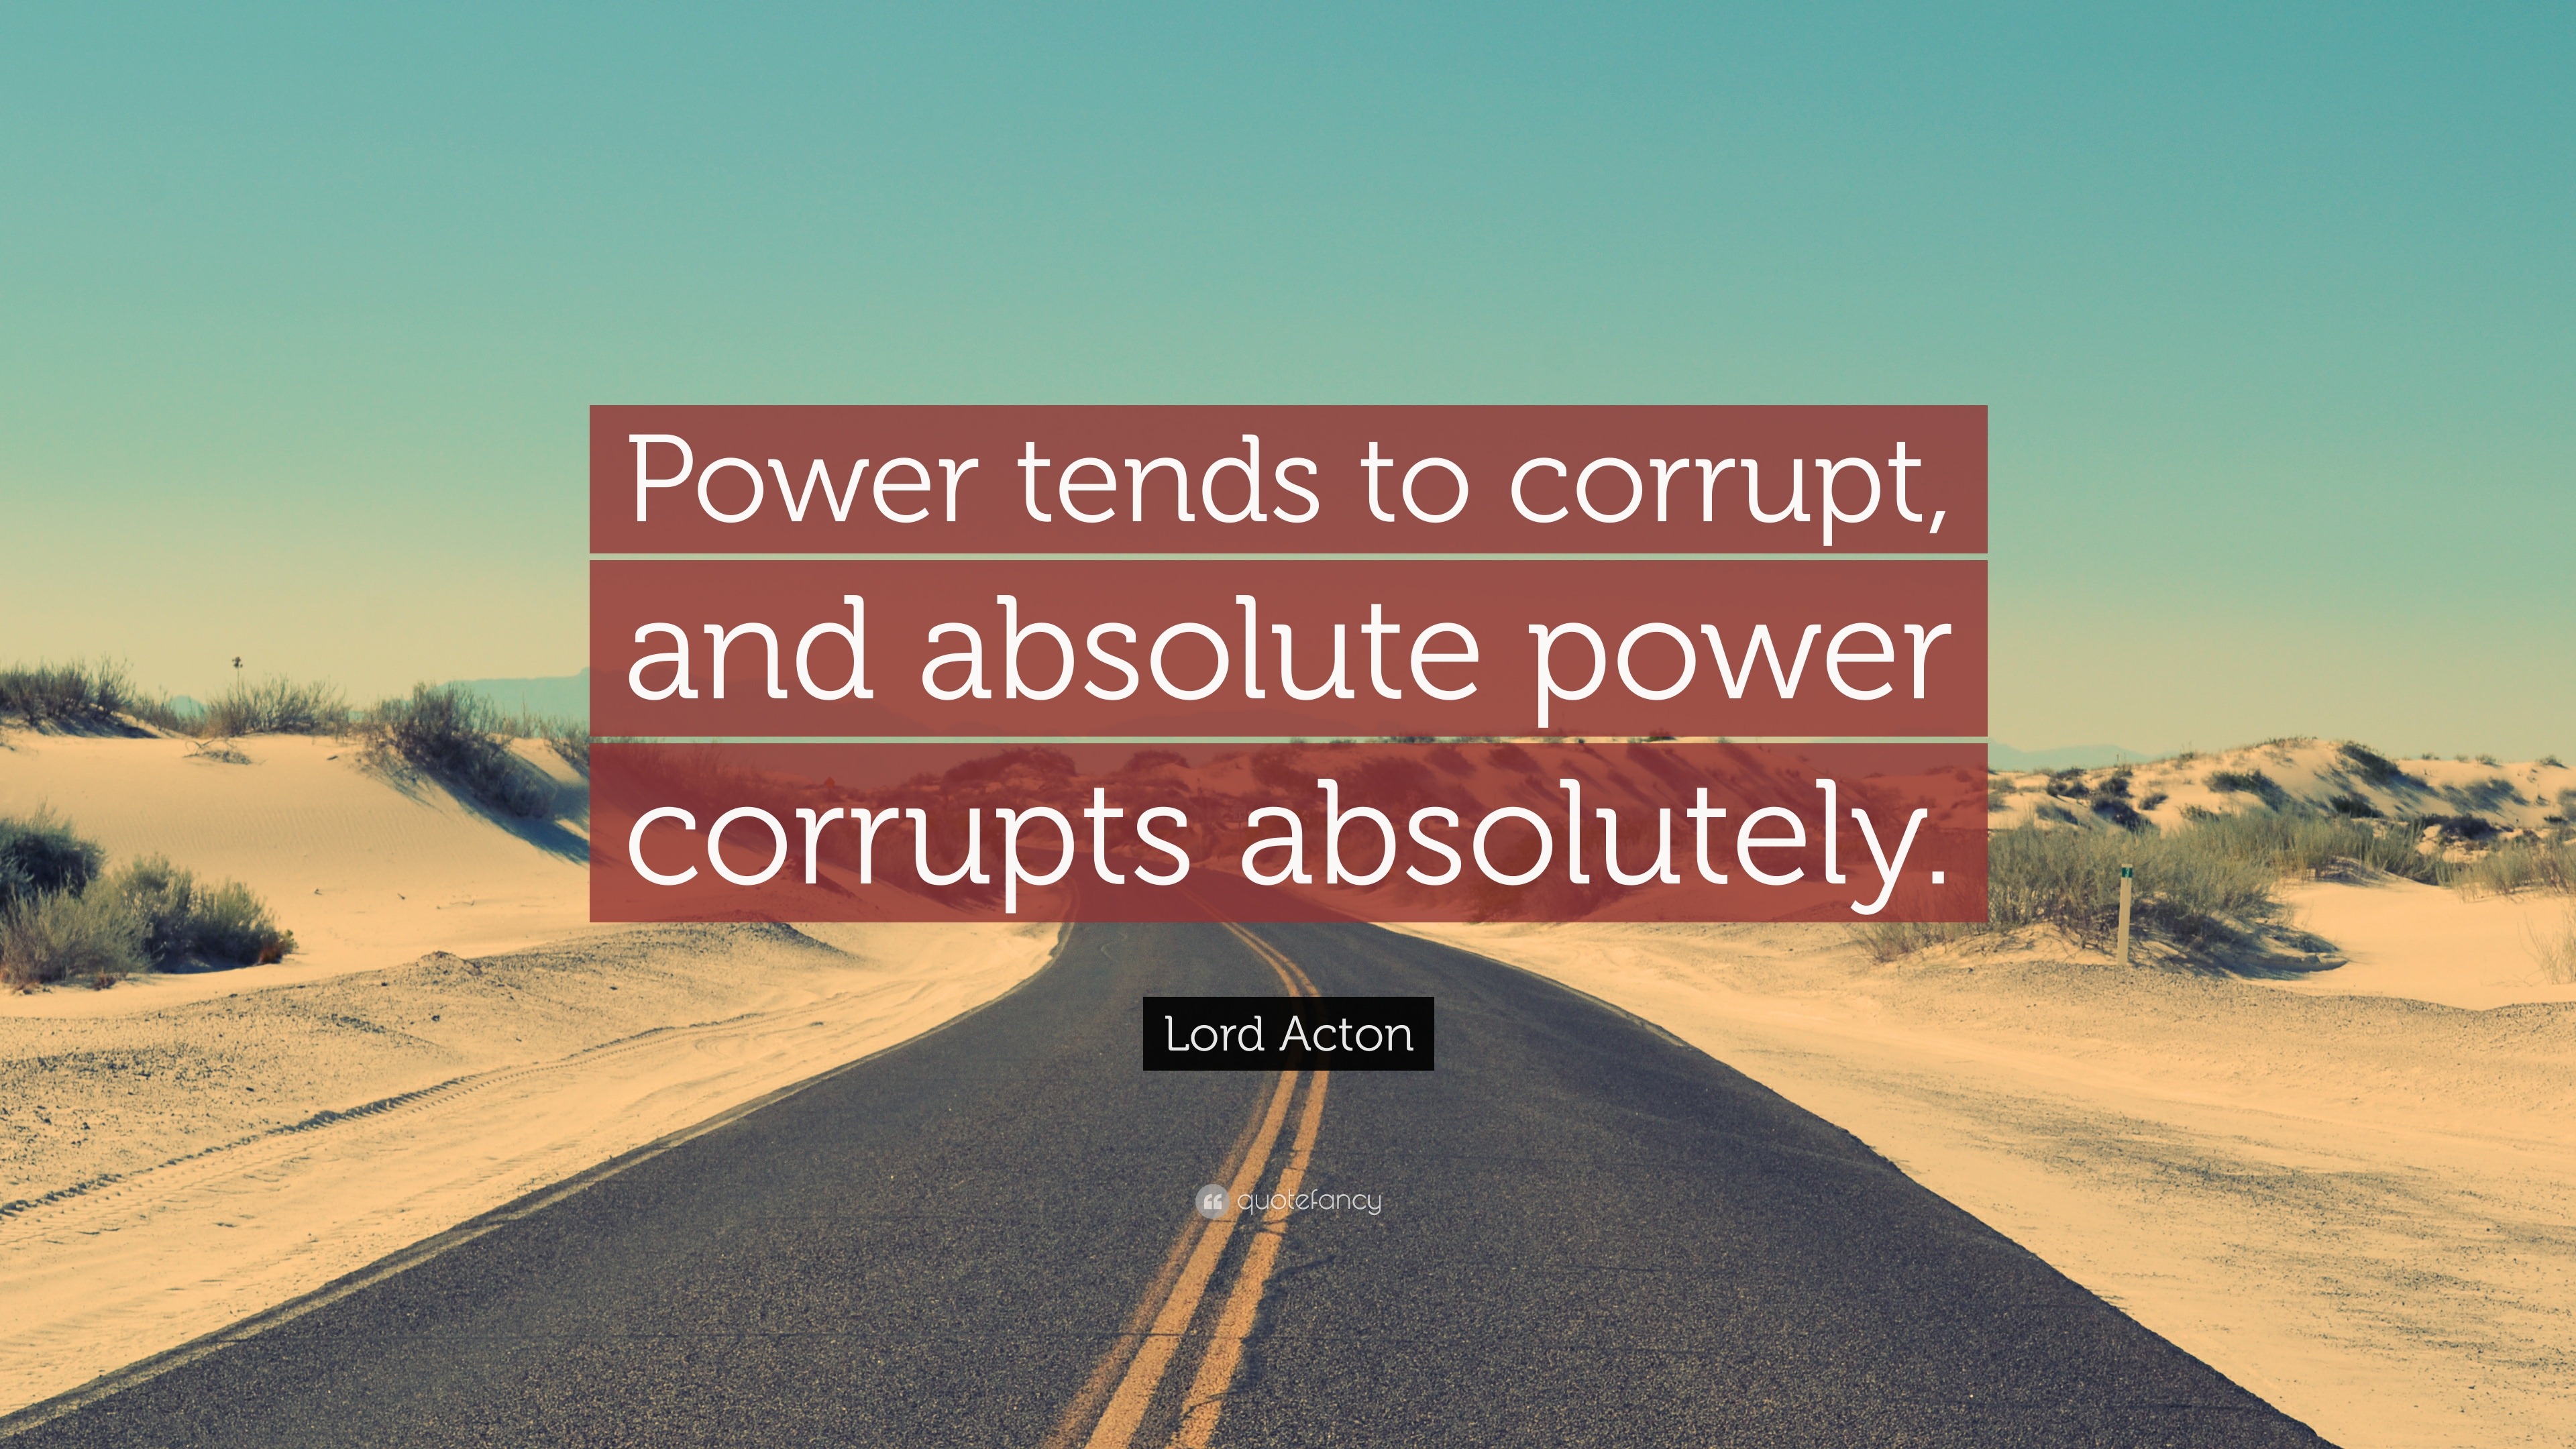 Power tends to corrupt and absolute power corrupts absolutely meaning